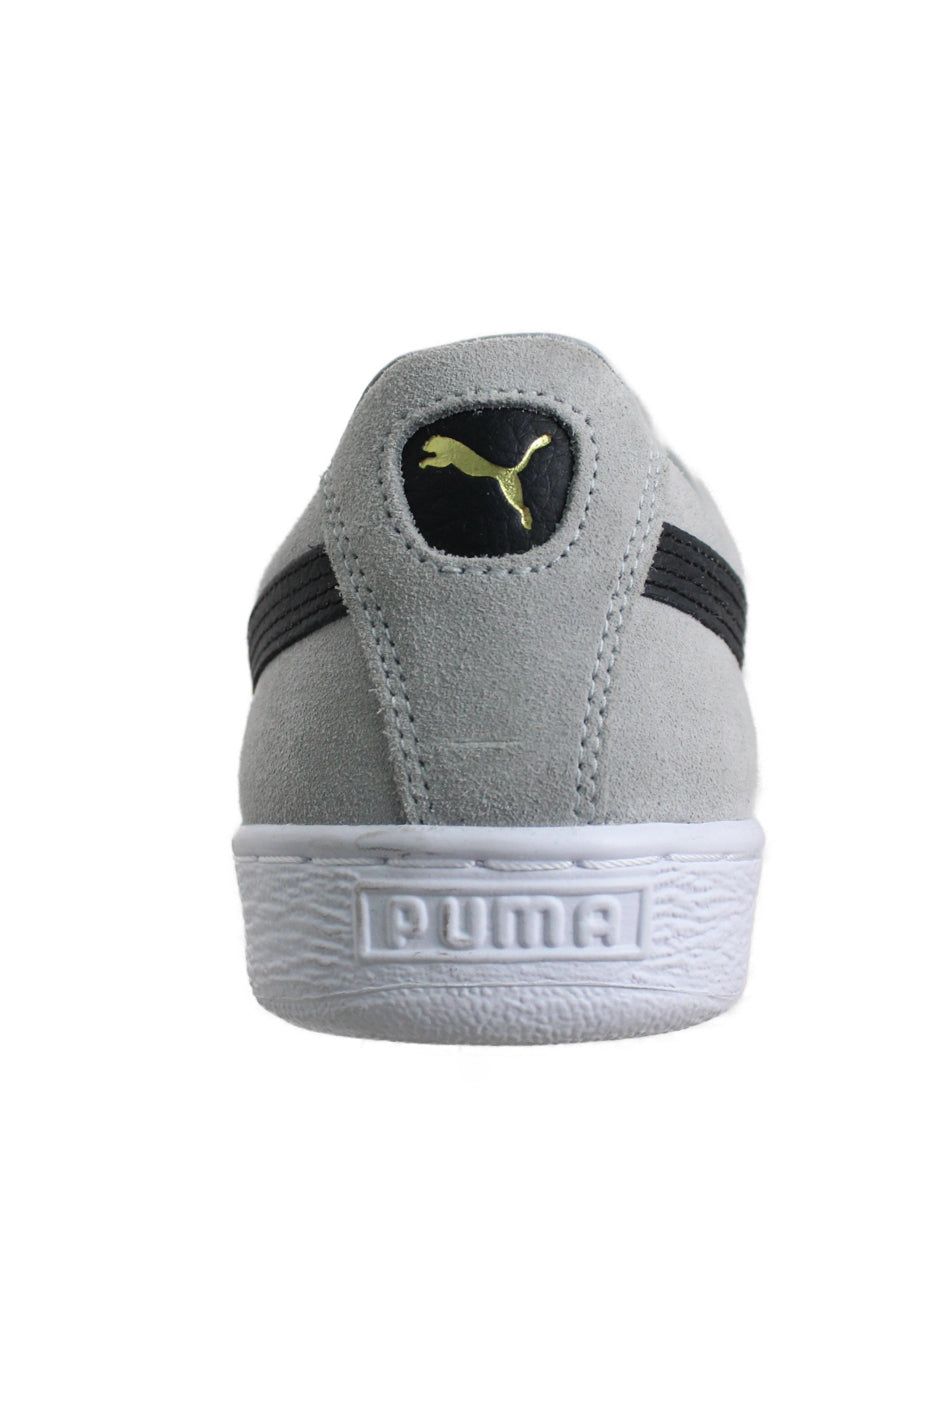 back heel angle of shoe. features golden puma logo under at top and text 'puma' on rubber sole. 